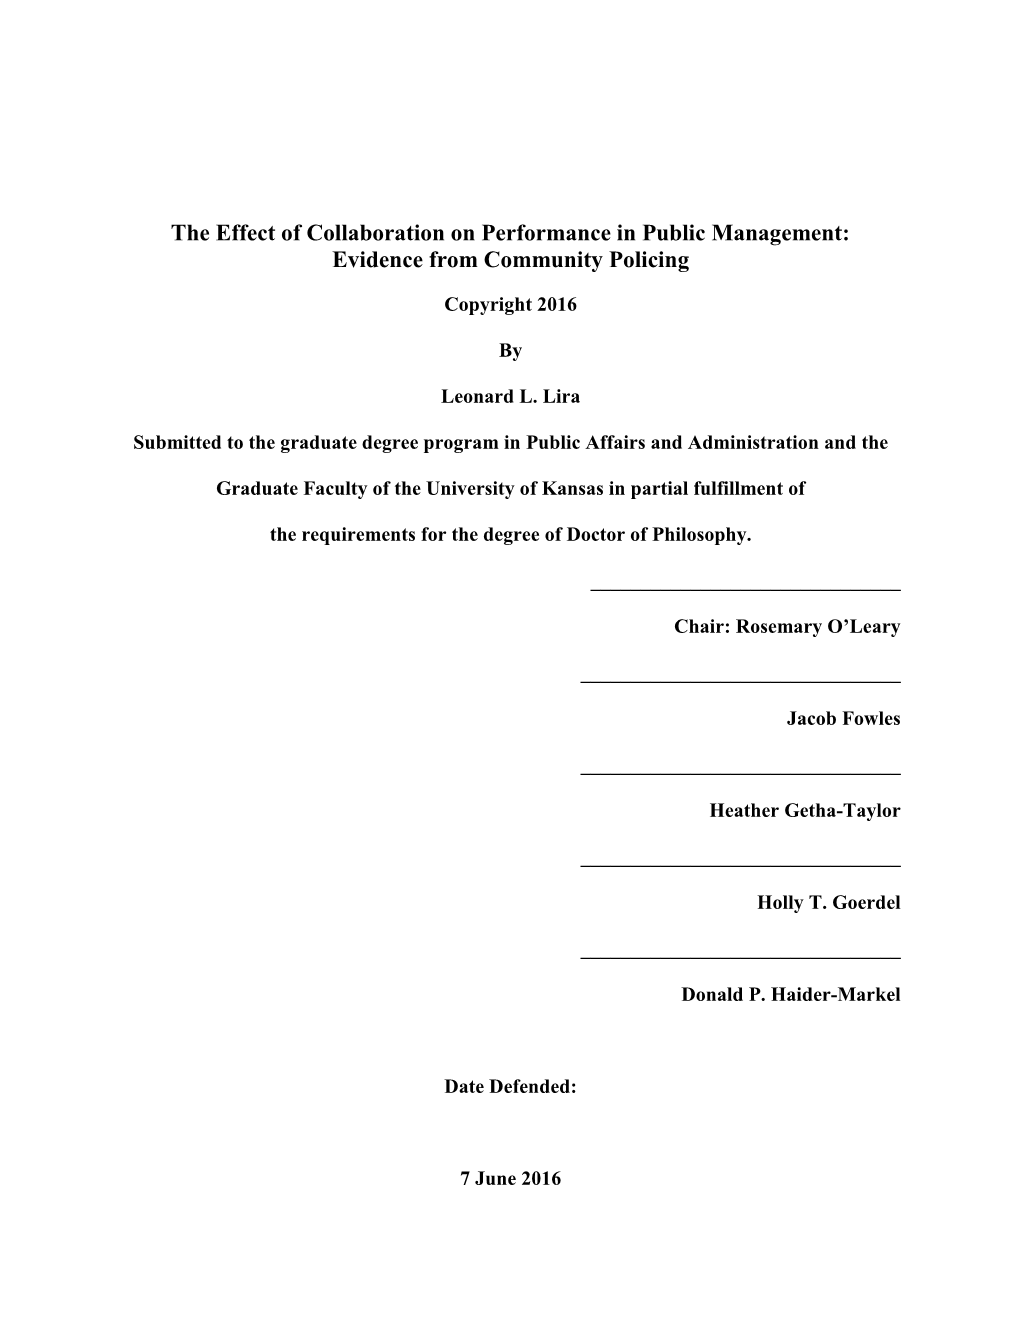 The Effect of Collaboration on Performance in Public Management: Evidence from Community Policing